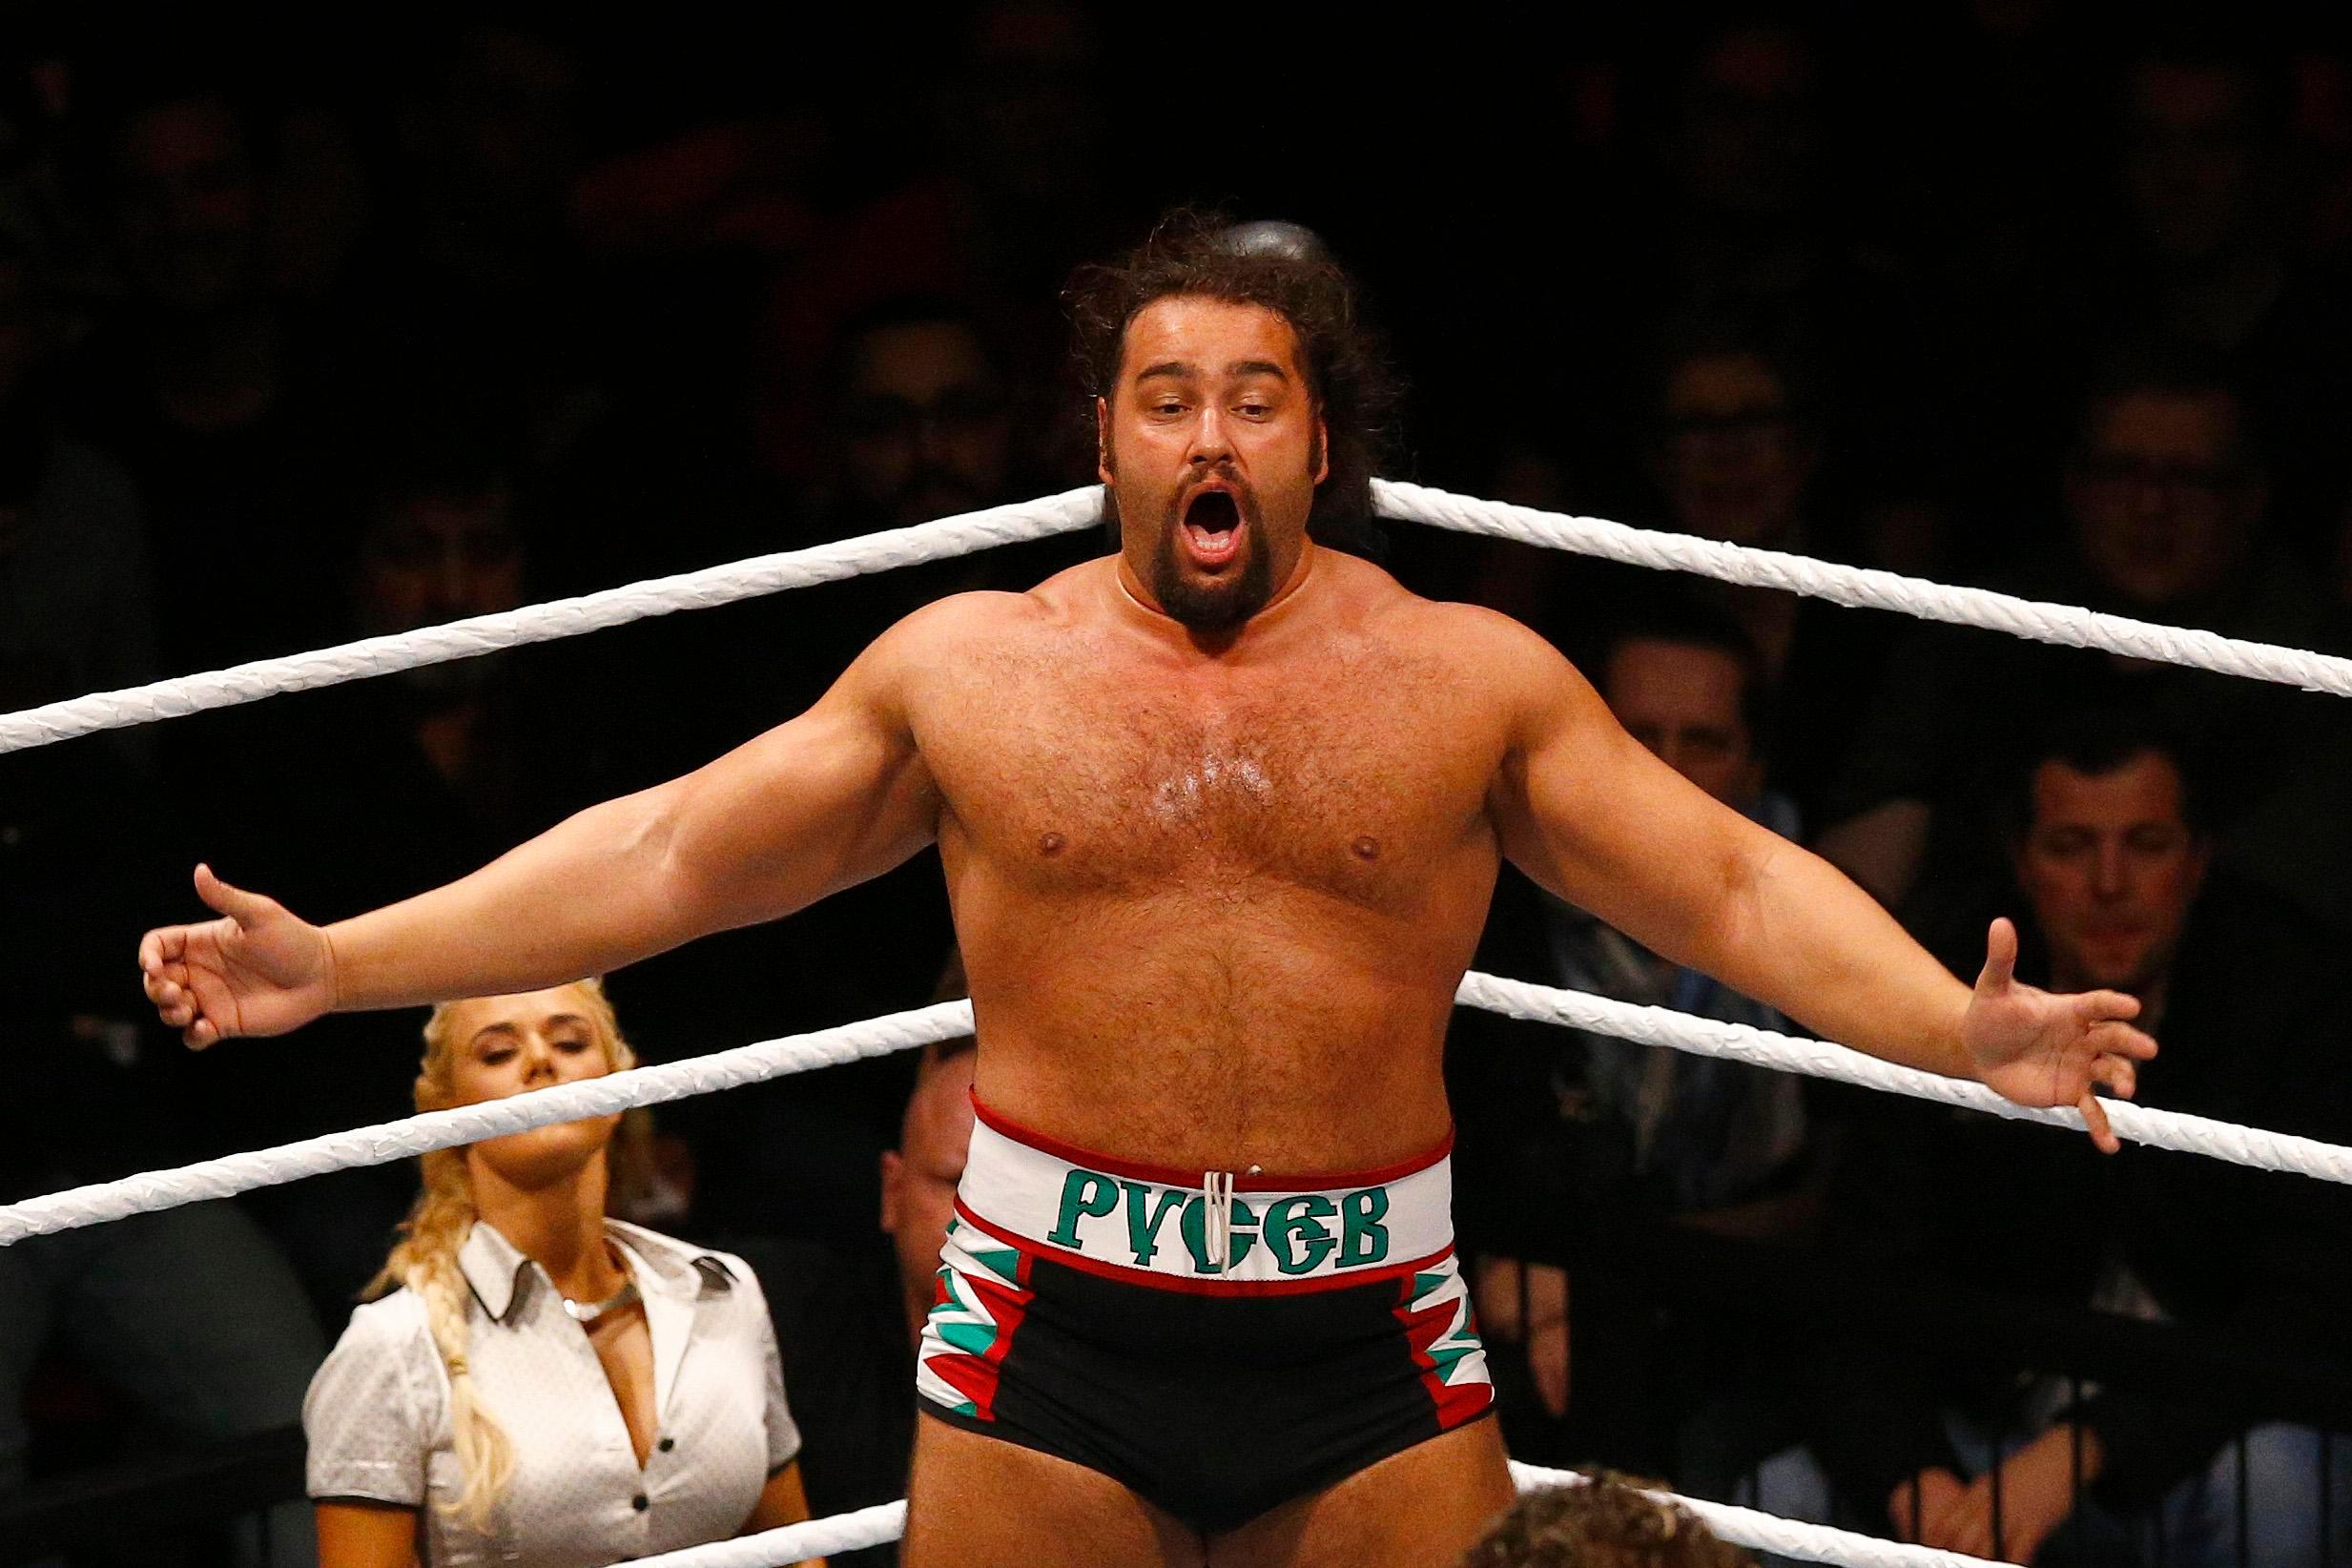 WWE star and Real Madrid fan Rusev wants Chelsea forward Eden Hazard to replace Cristiano Ronaldo